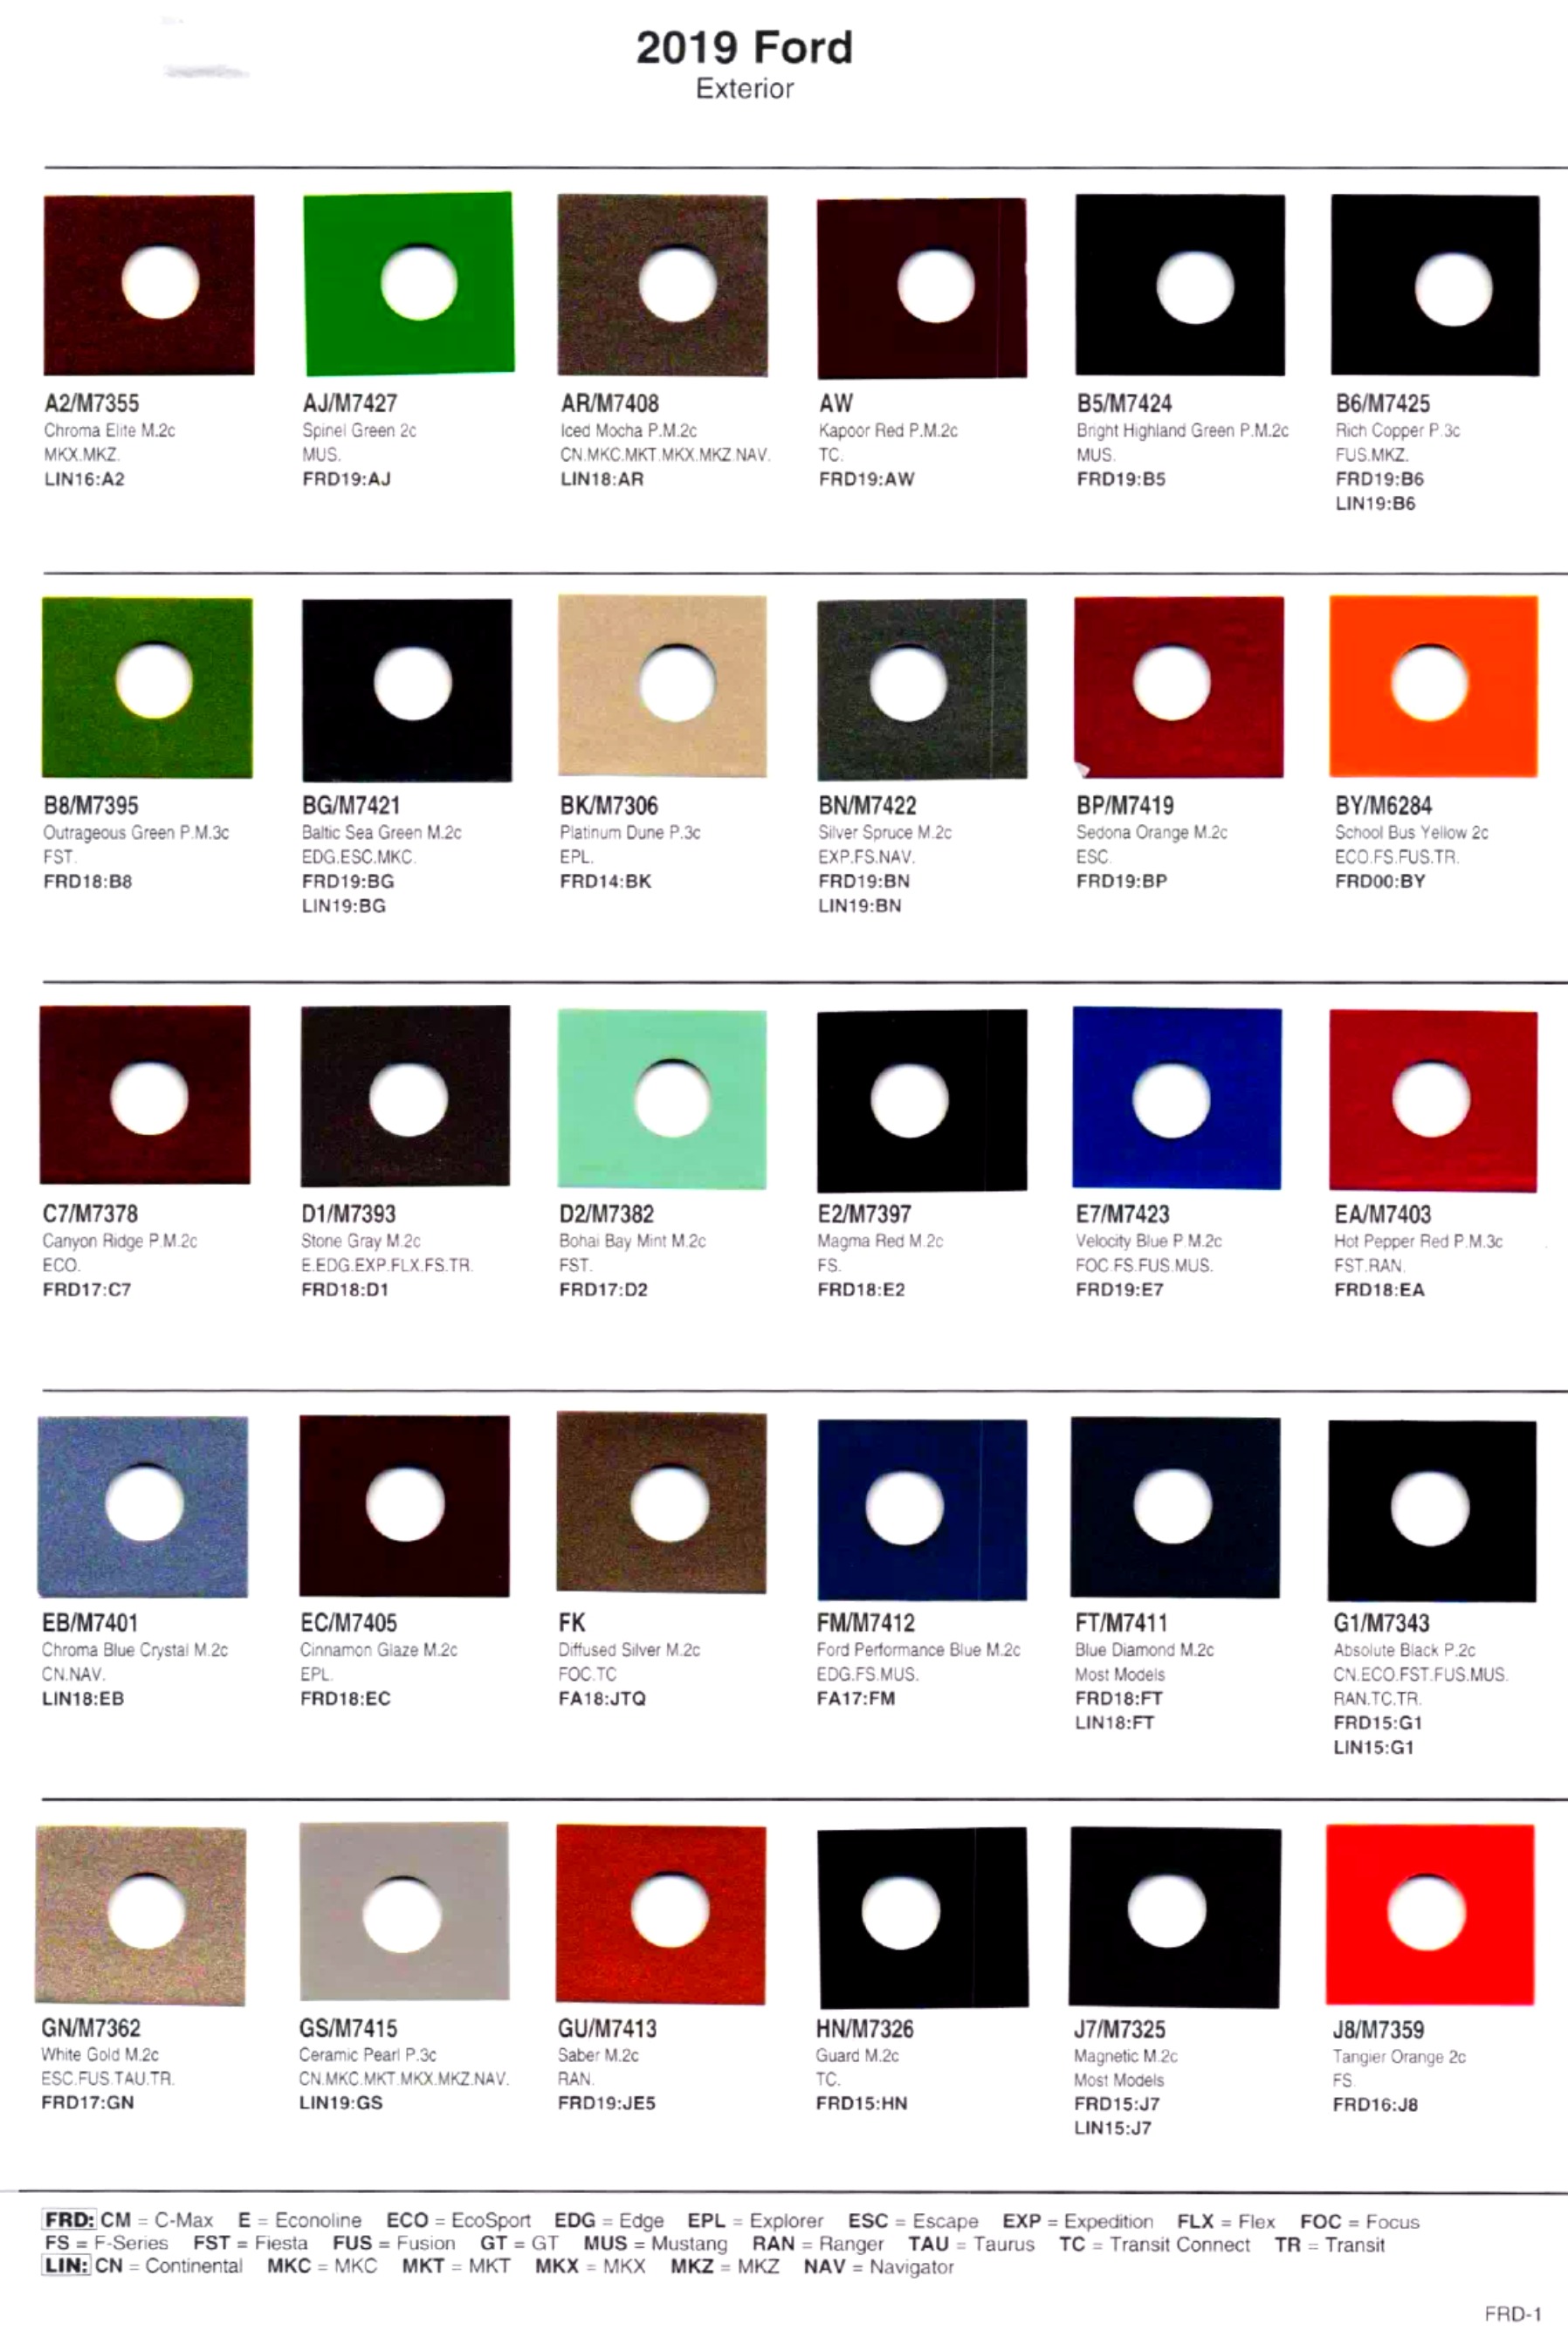 Paint Chips and Paint code examples for Ford Motor company of  Interior, Exterior, Wheel, Accent, Underhood & Striping colors used by Ford & Lincoln vehicles. 